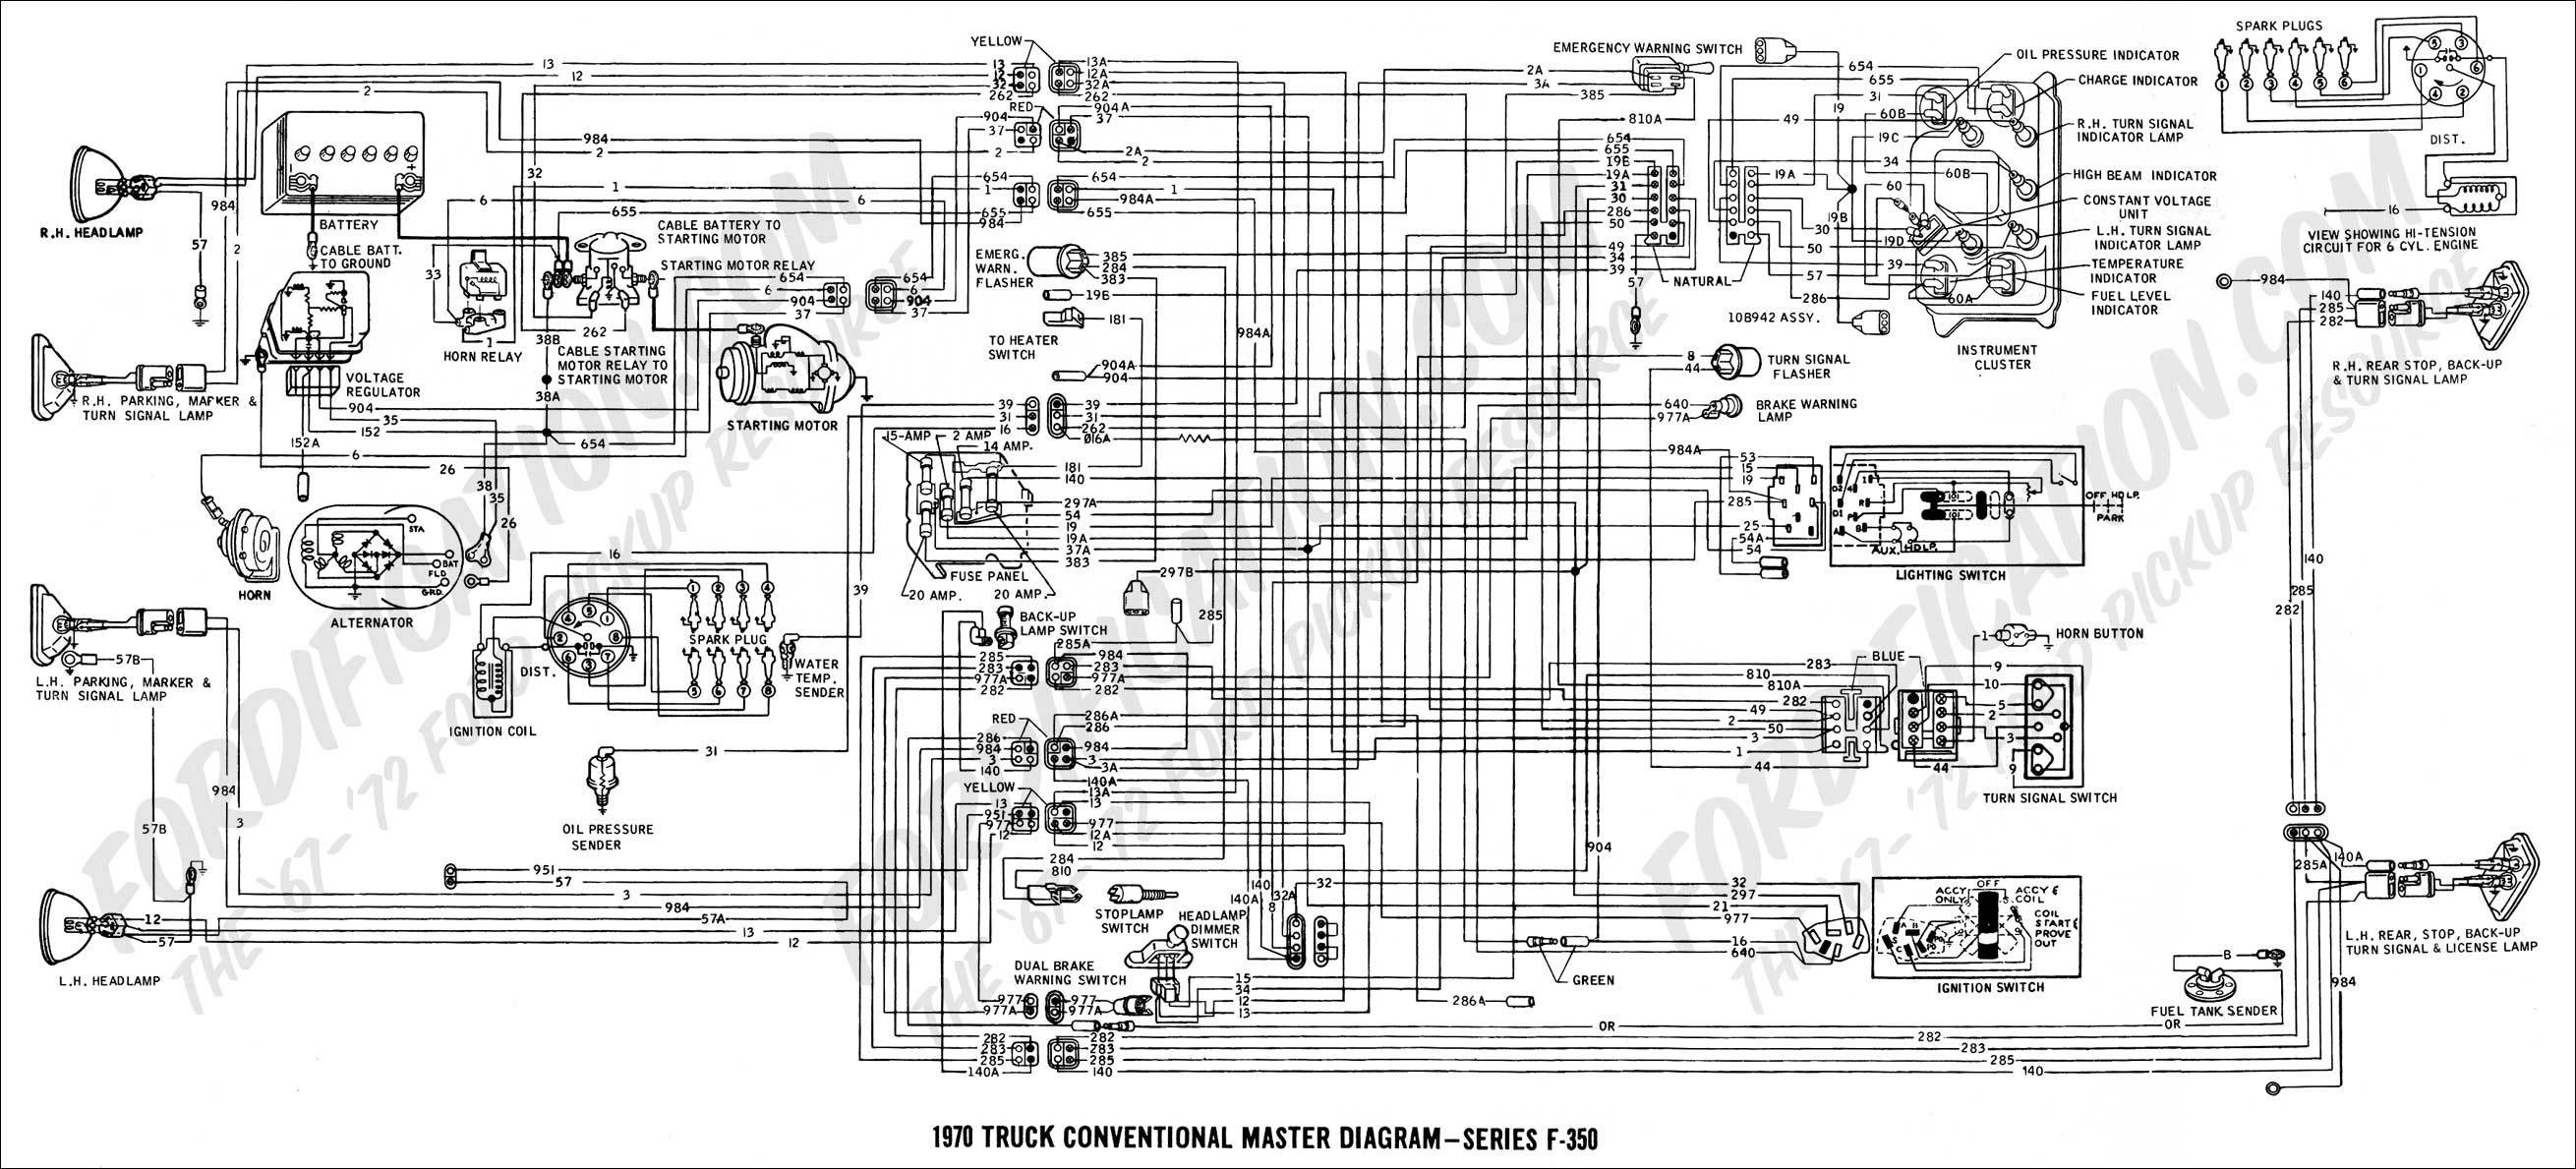 2004 ford Ranger Wiring Diagram Bucket 2002 F350 Superduty Electrical Wiring Diagrams Wiring Info •